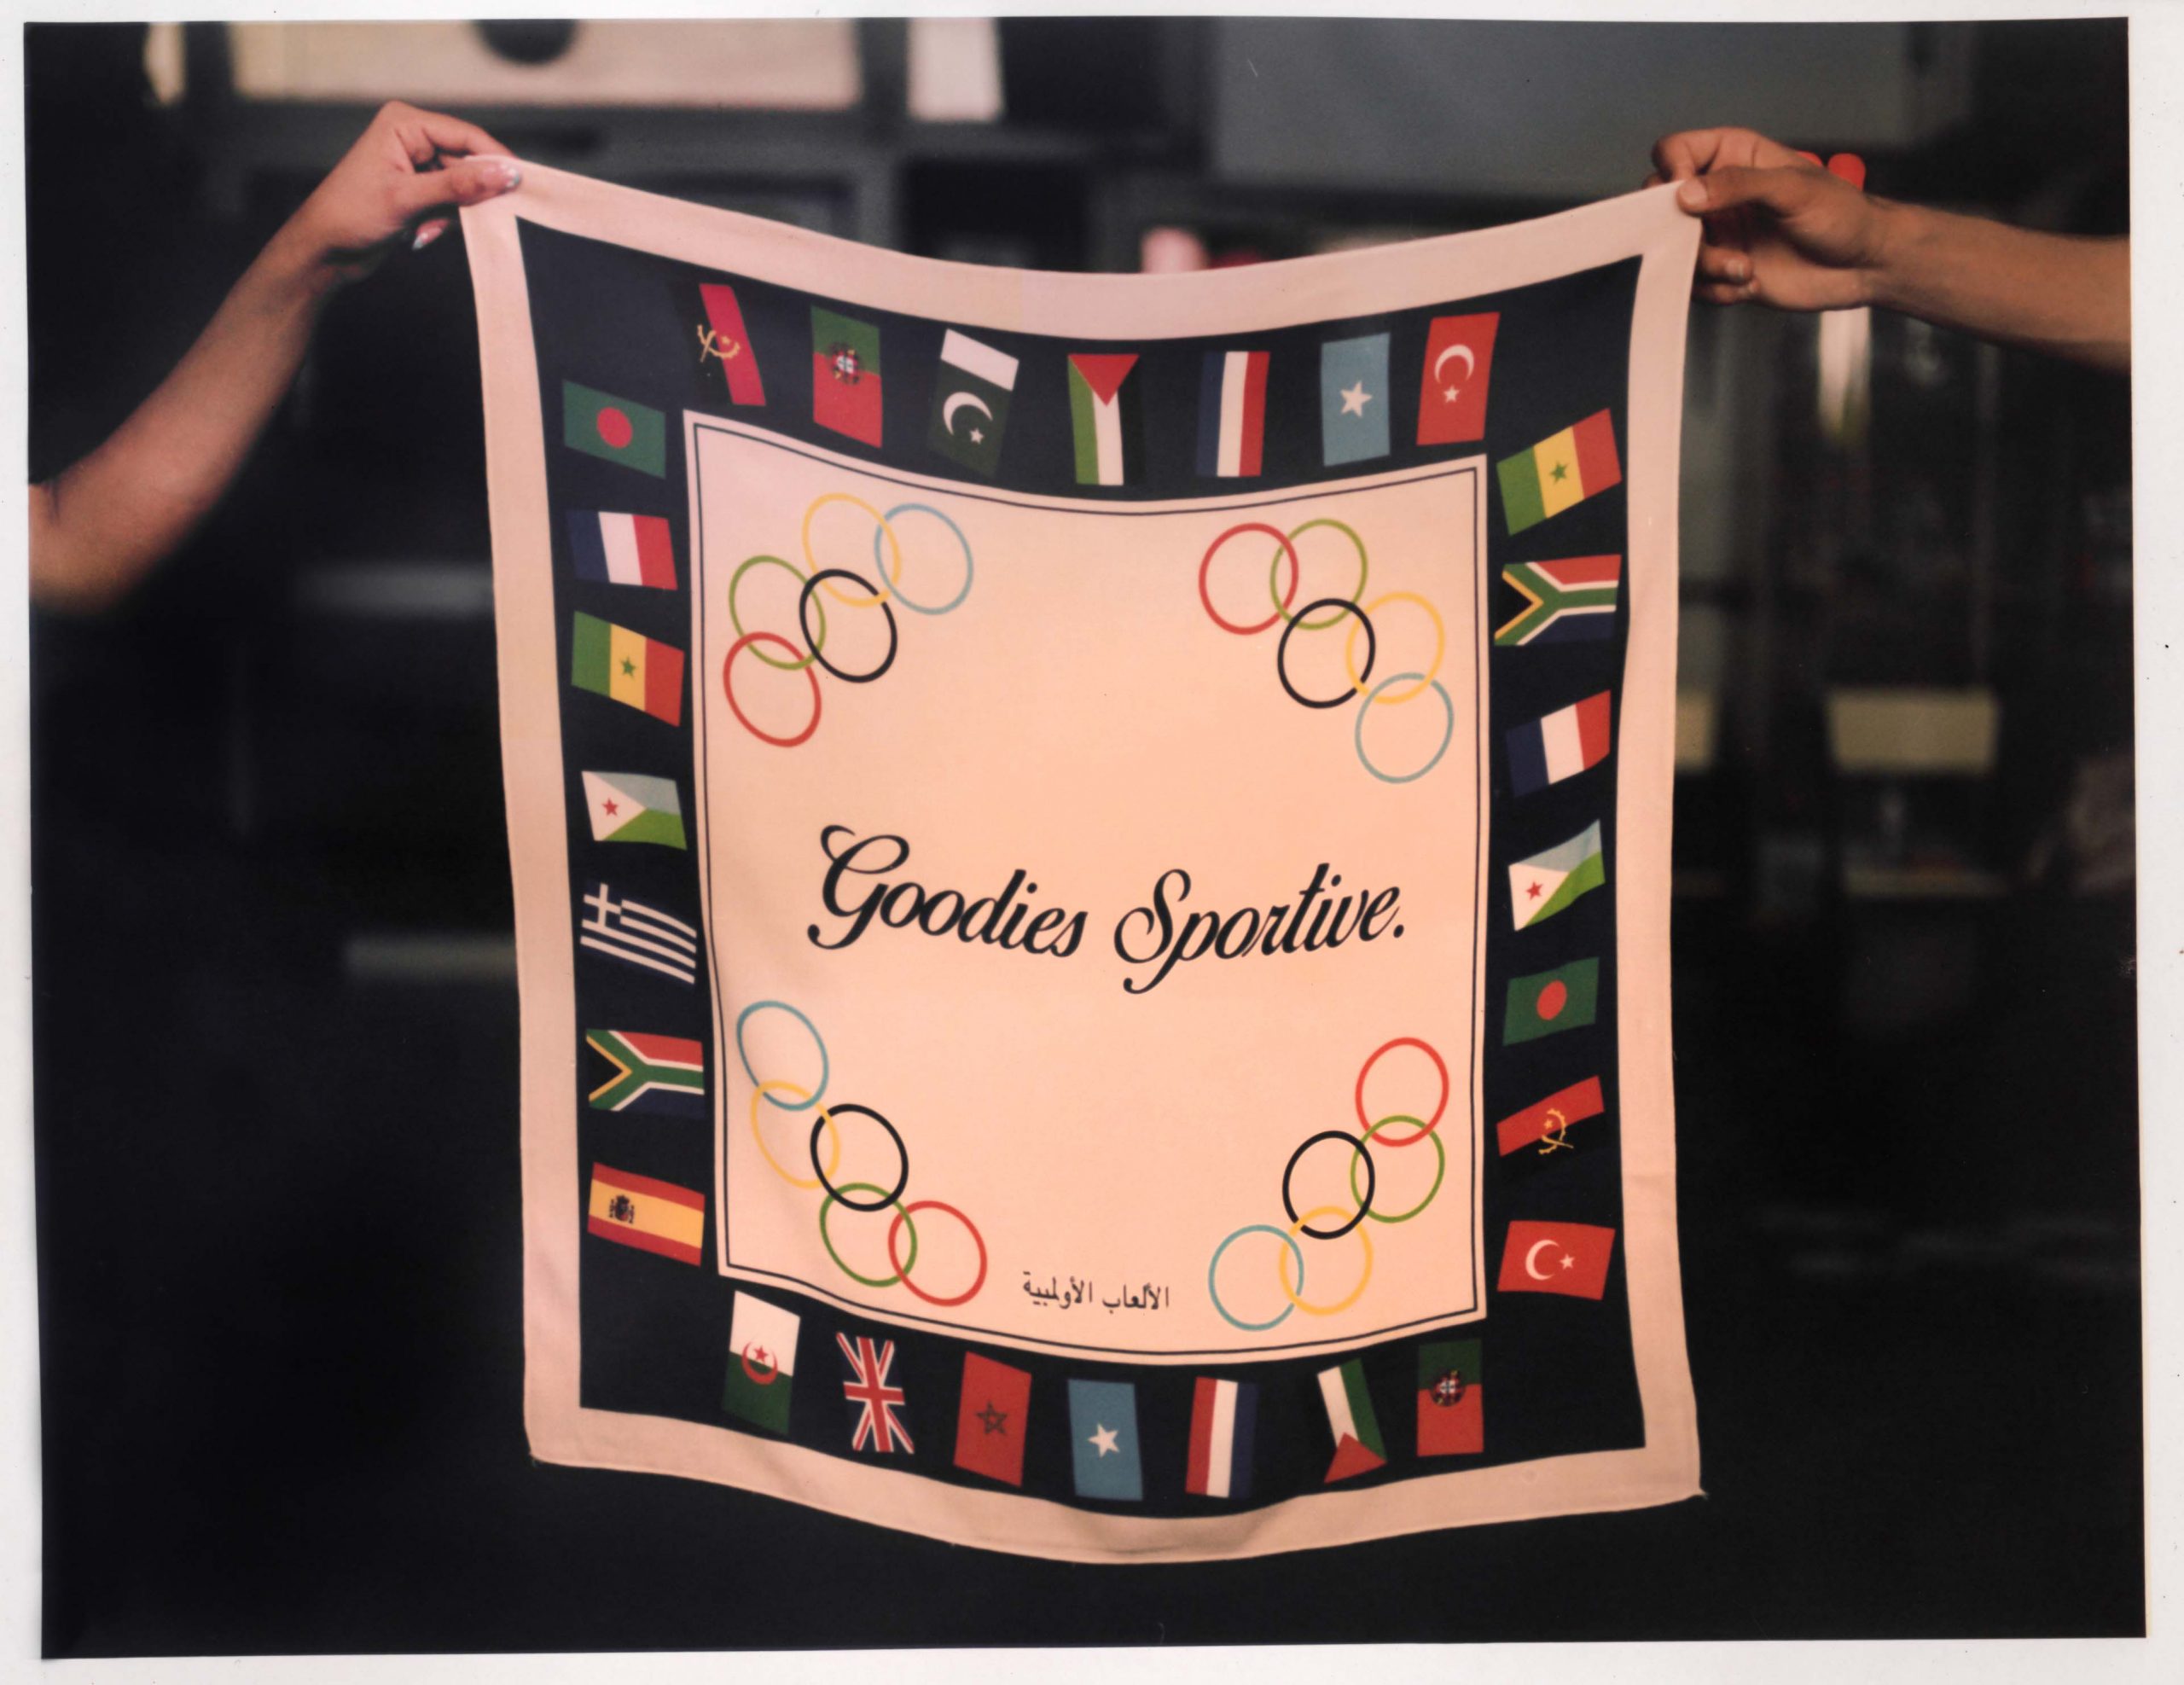 Olympic Games by Goodies Sportive